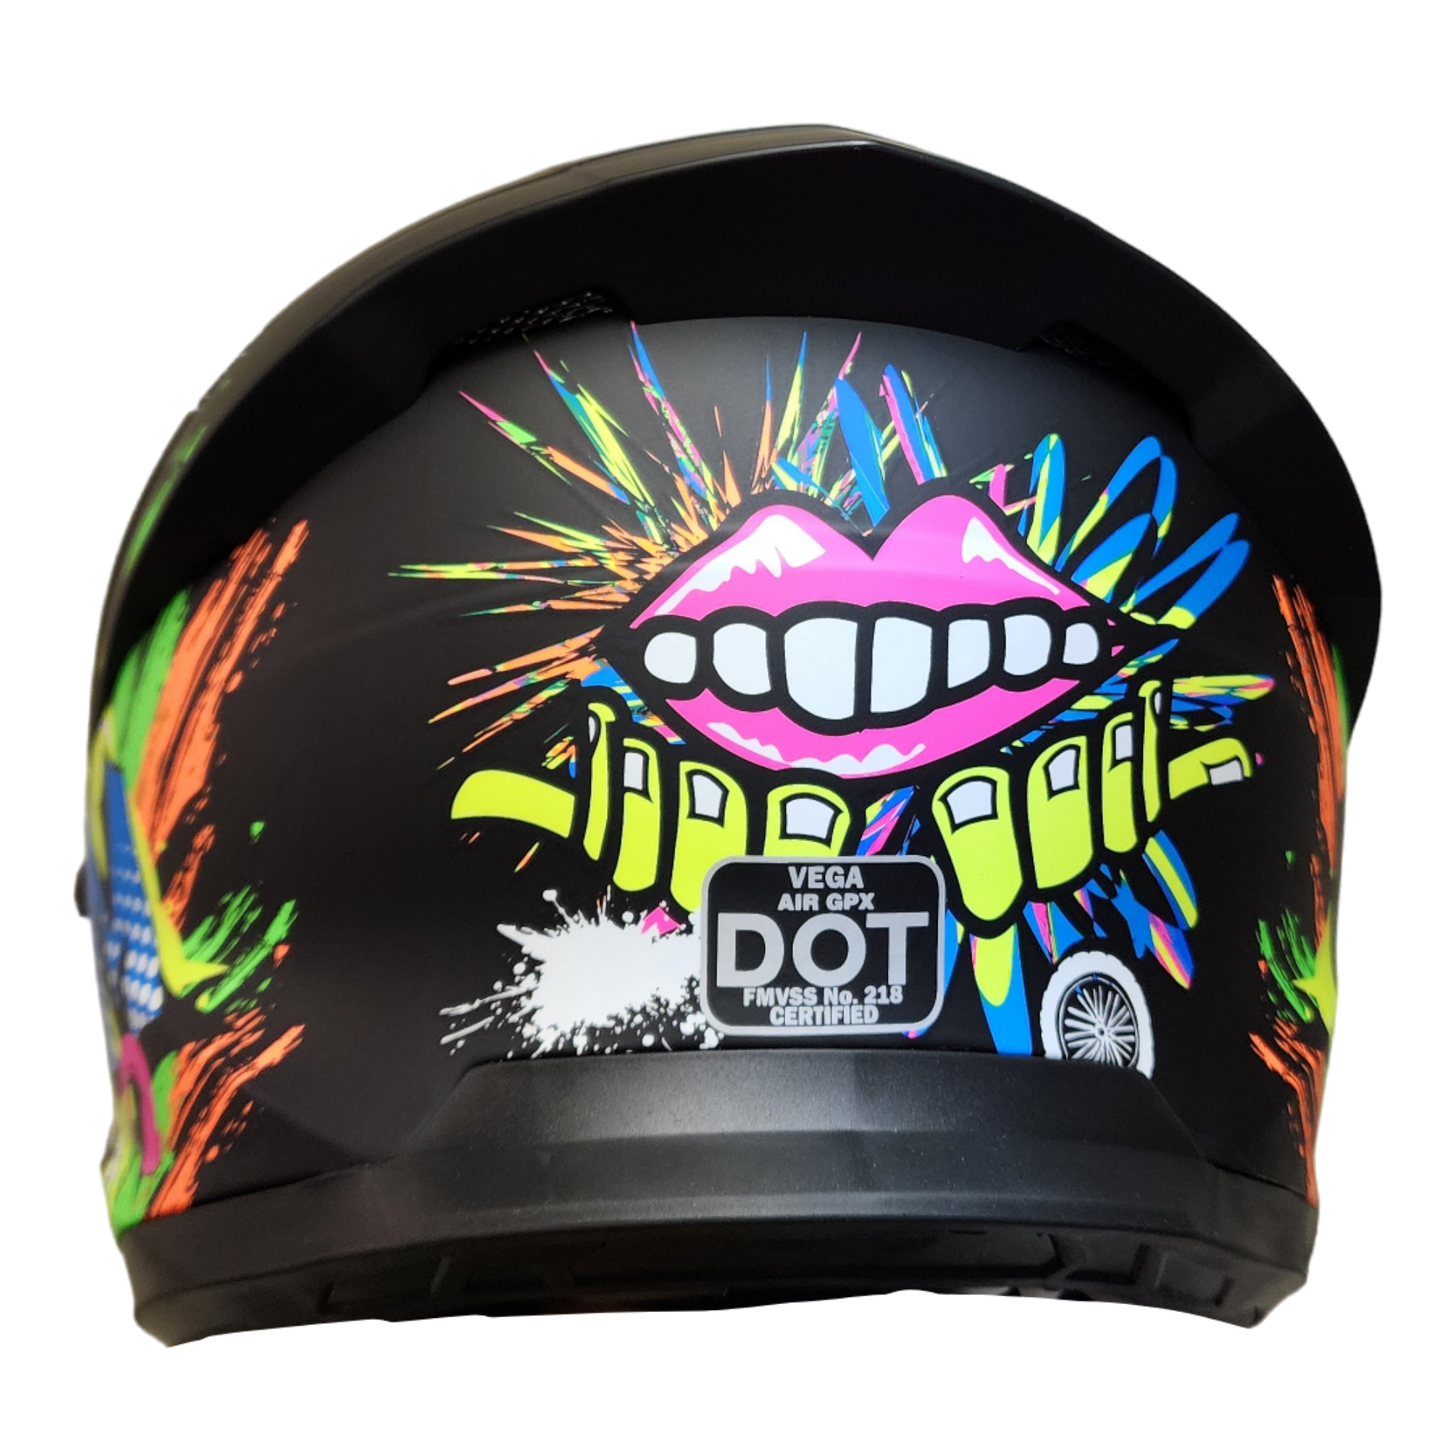 Vega AIR GPX Motorcycle Helmet - Ripper Graphic - Special Innovated Design